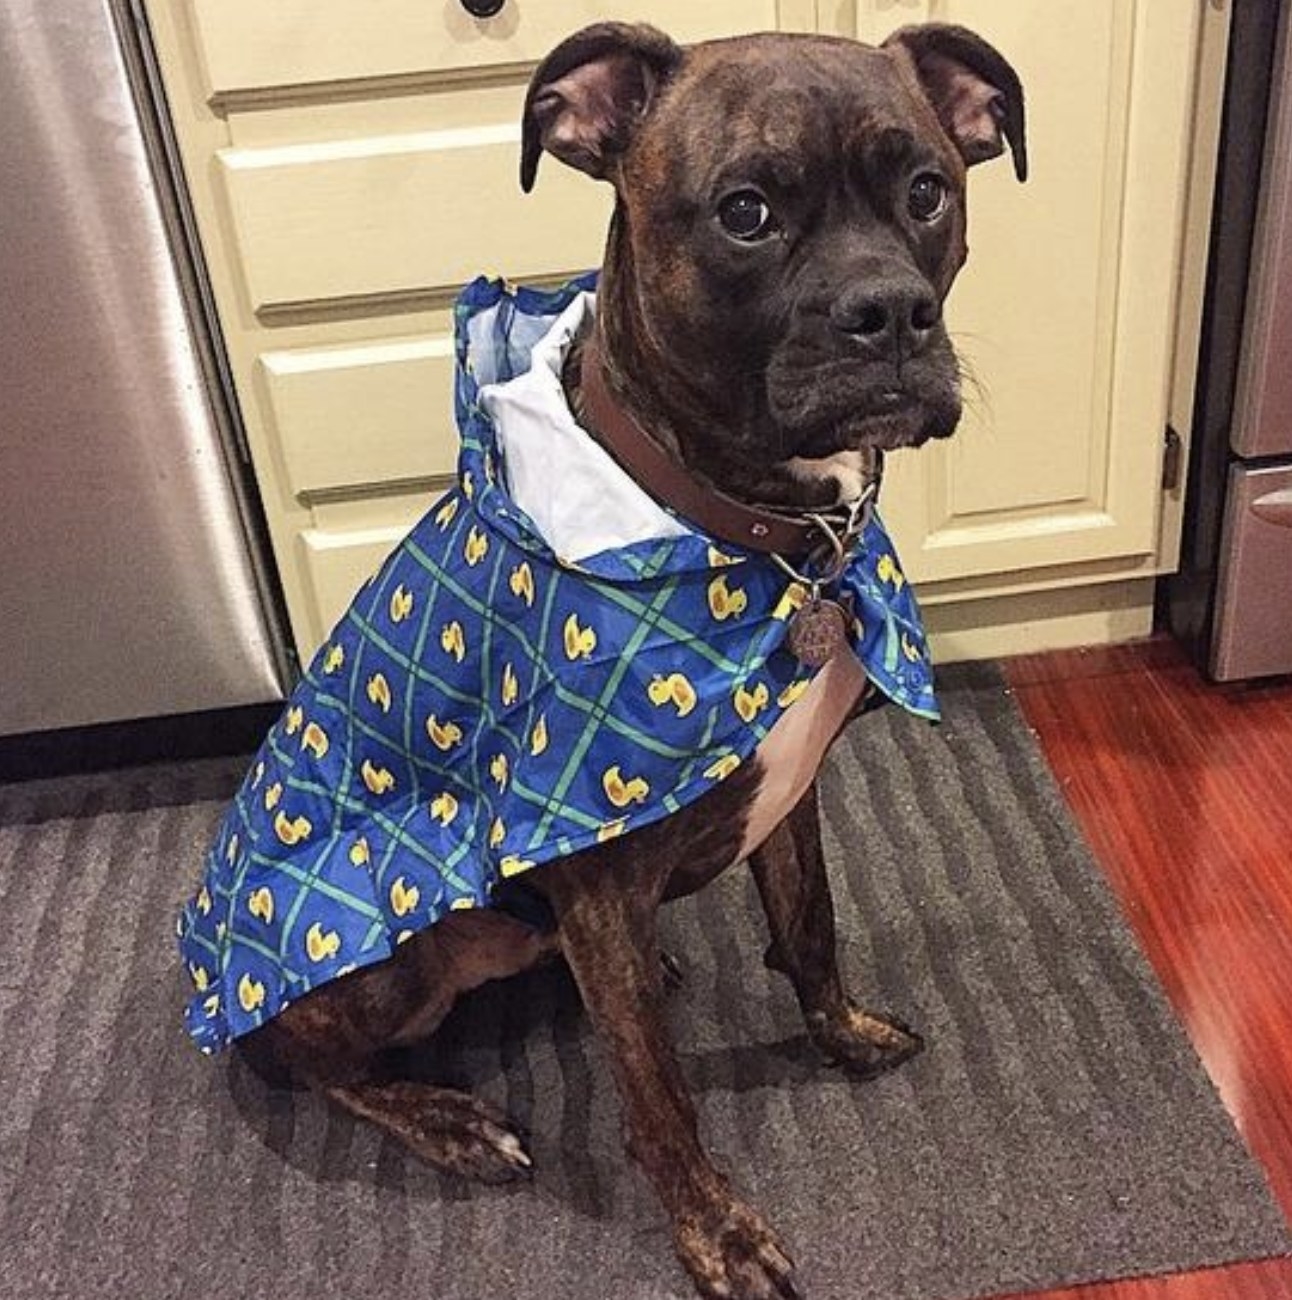 Reviewer photo of a dog wearing a blue raincoat with a rubber duck pattern on it